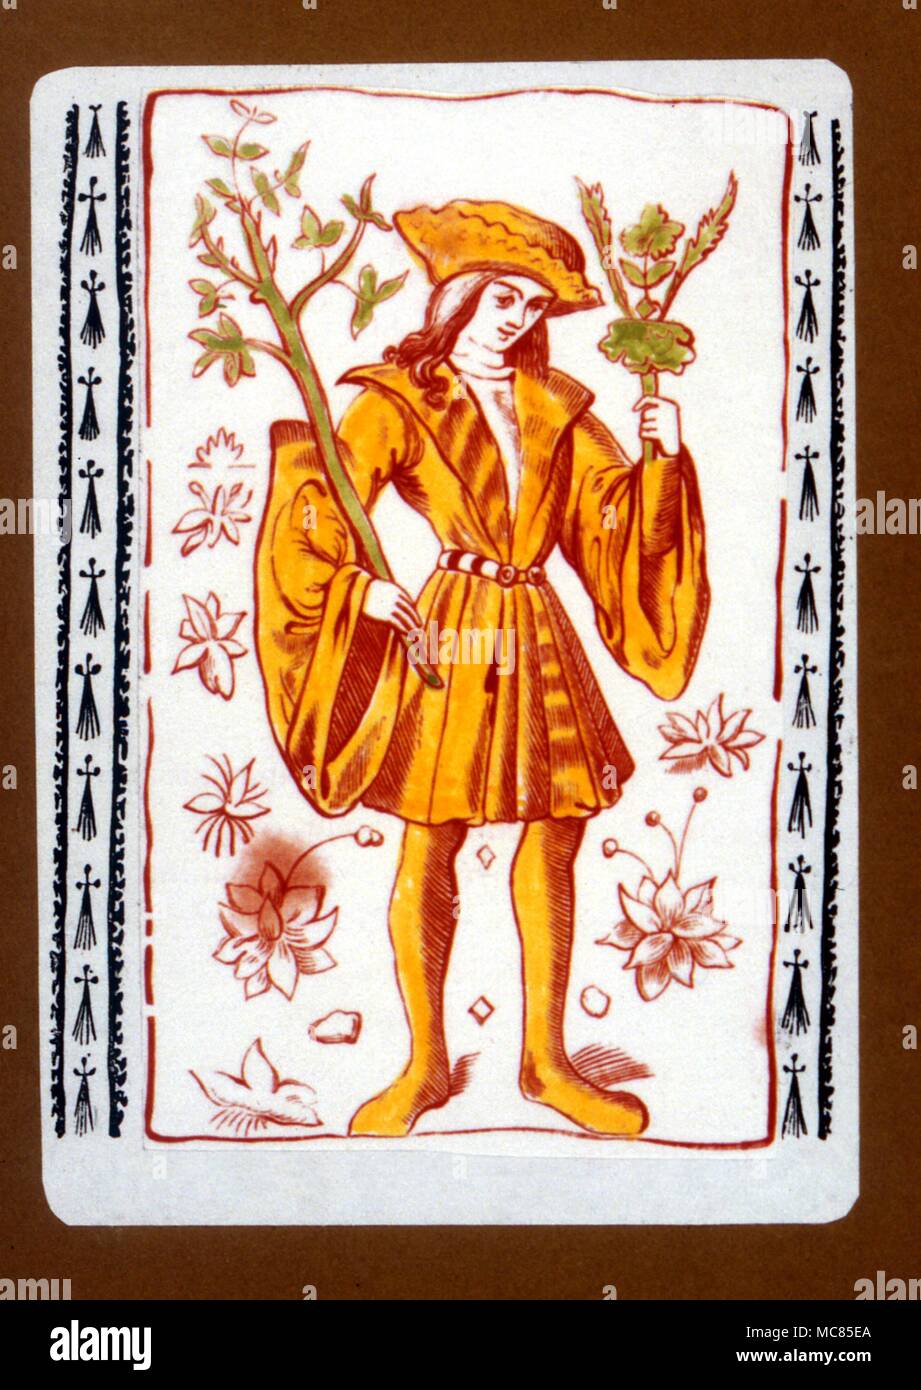 Cartomancy. French playing card, sometimes called 'The Master fo the Foliage'. After an early 19th century engraving, for D'Ambly. Stock Photo